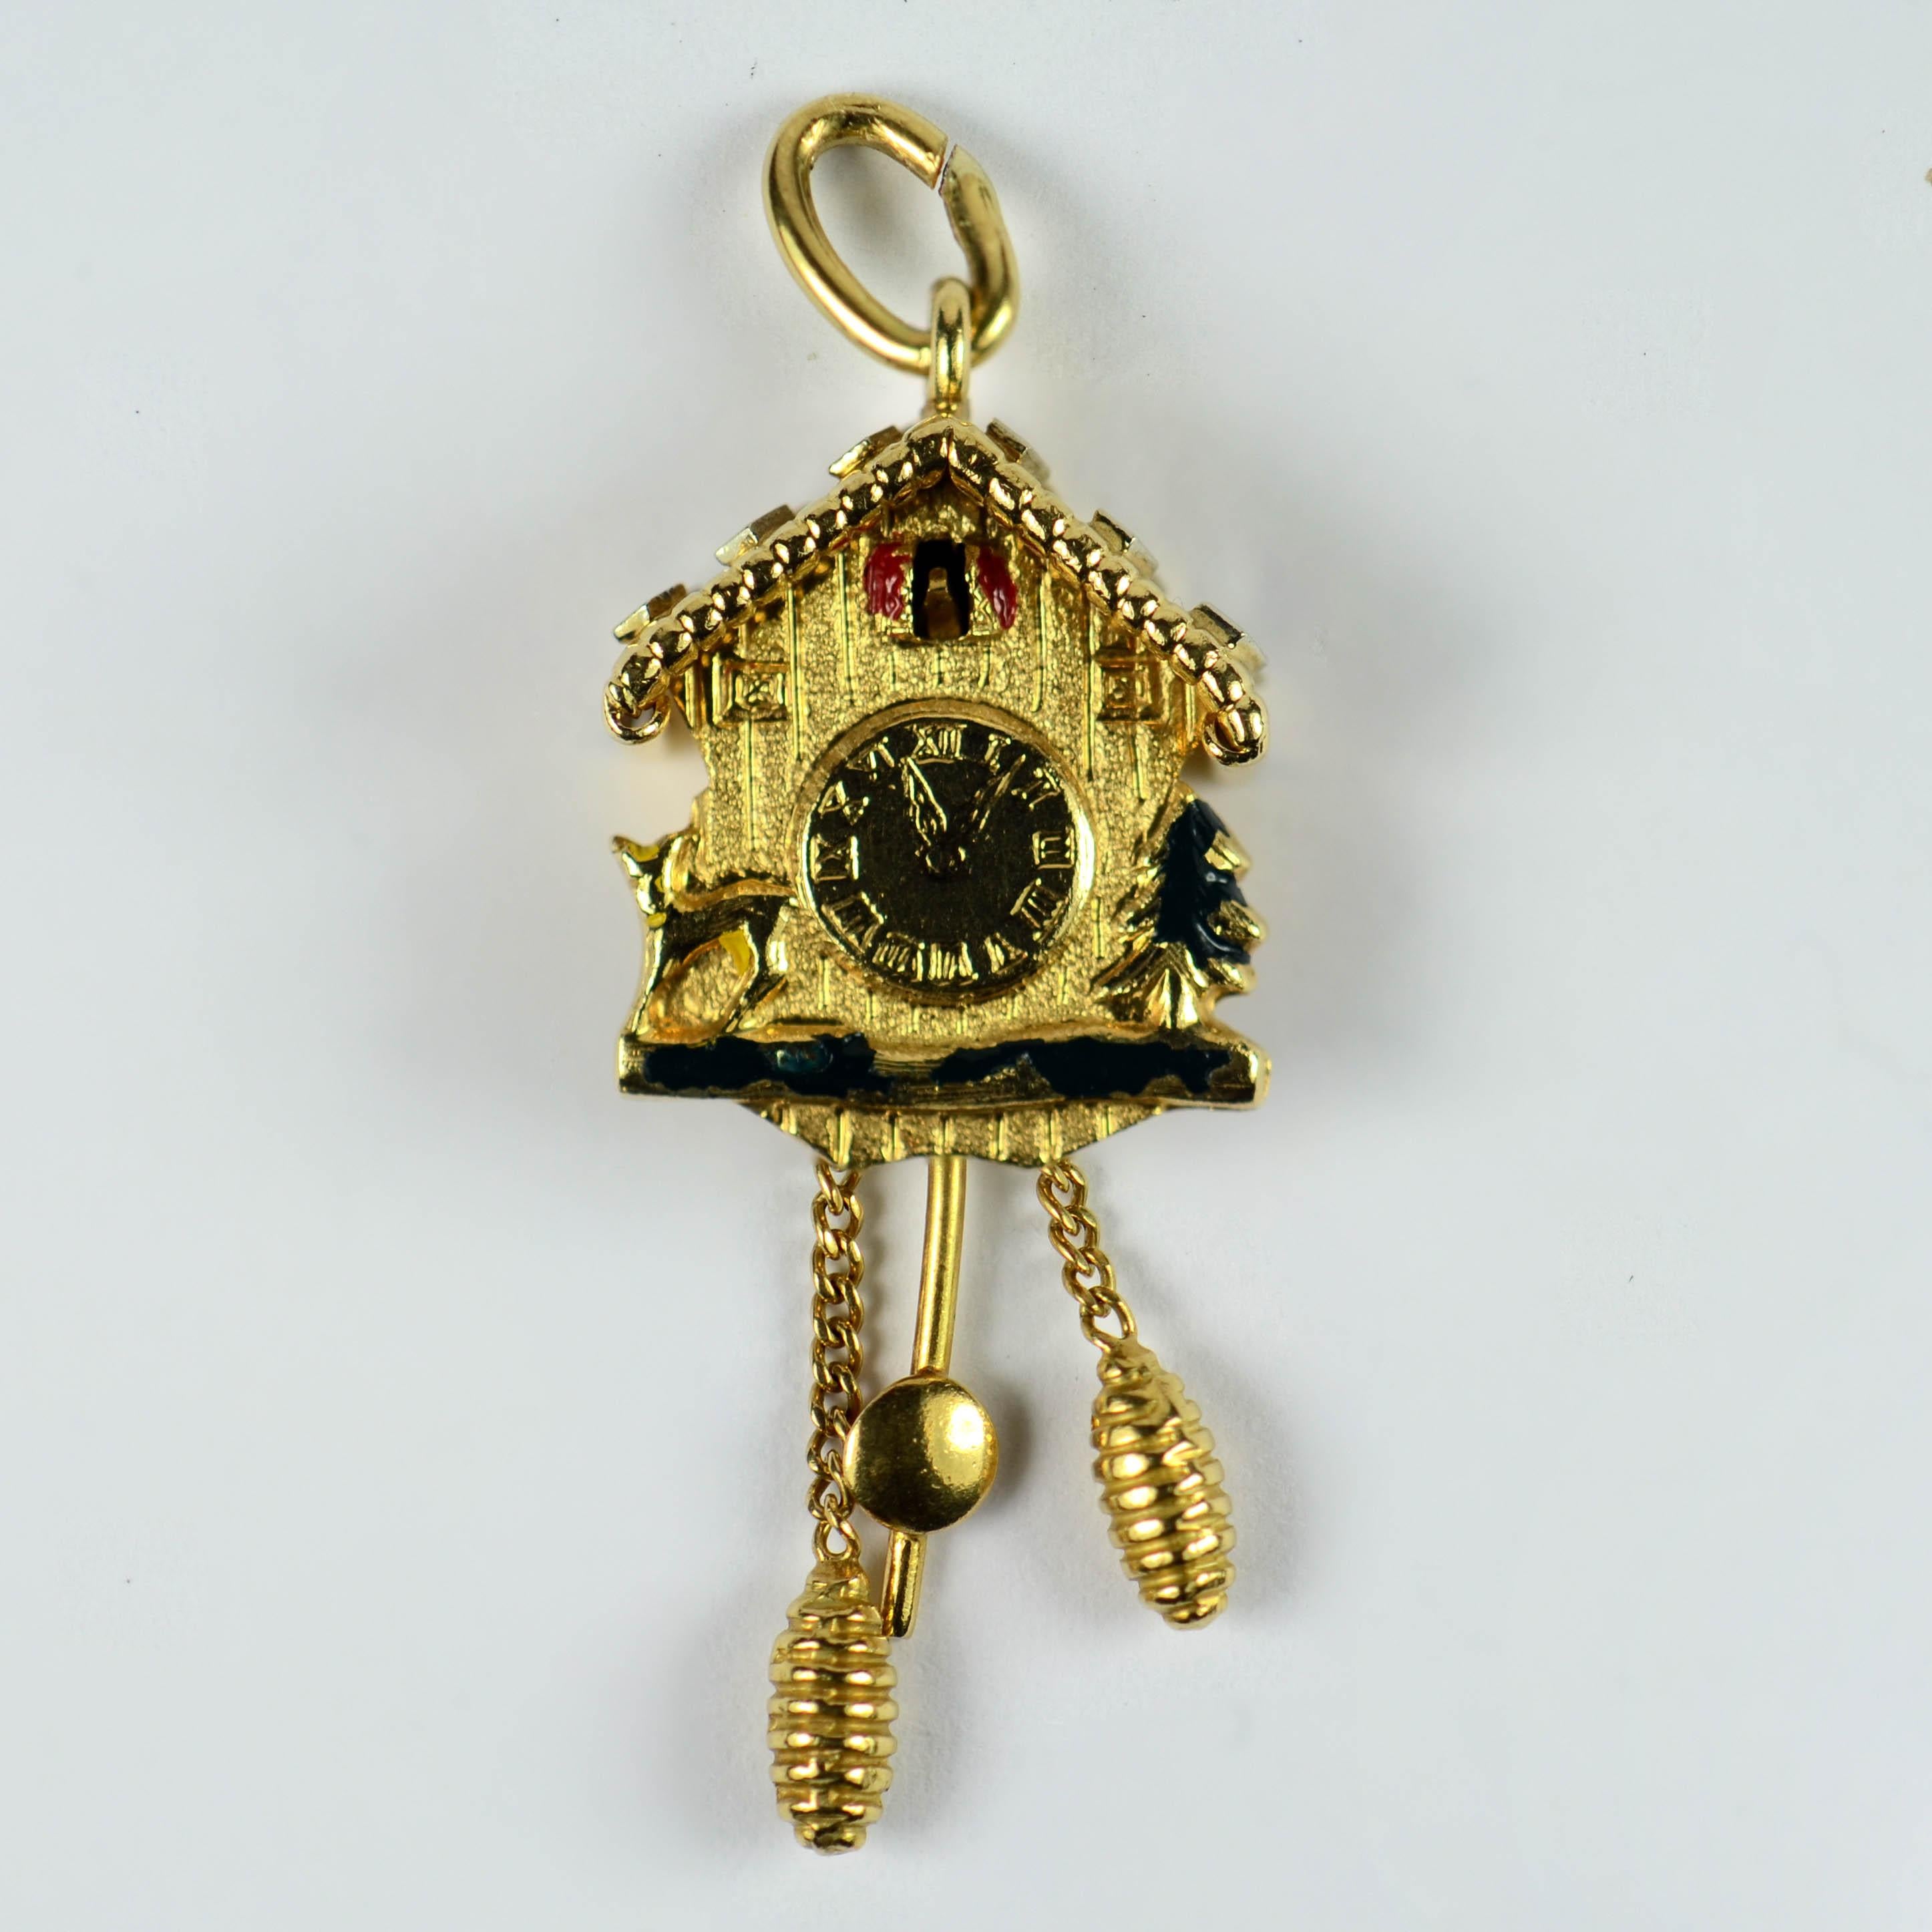 An 18 karat gold charm pendant designed as a cuckoo clock with moveable weights and pendulum. The front depicts a Christmas tree and a deer with traces of enamel. The roof is studded with white gold rhombs. 
Marked 750 for 18 karat gold, and CB for